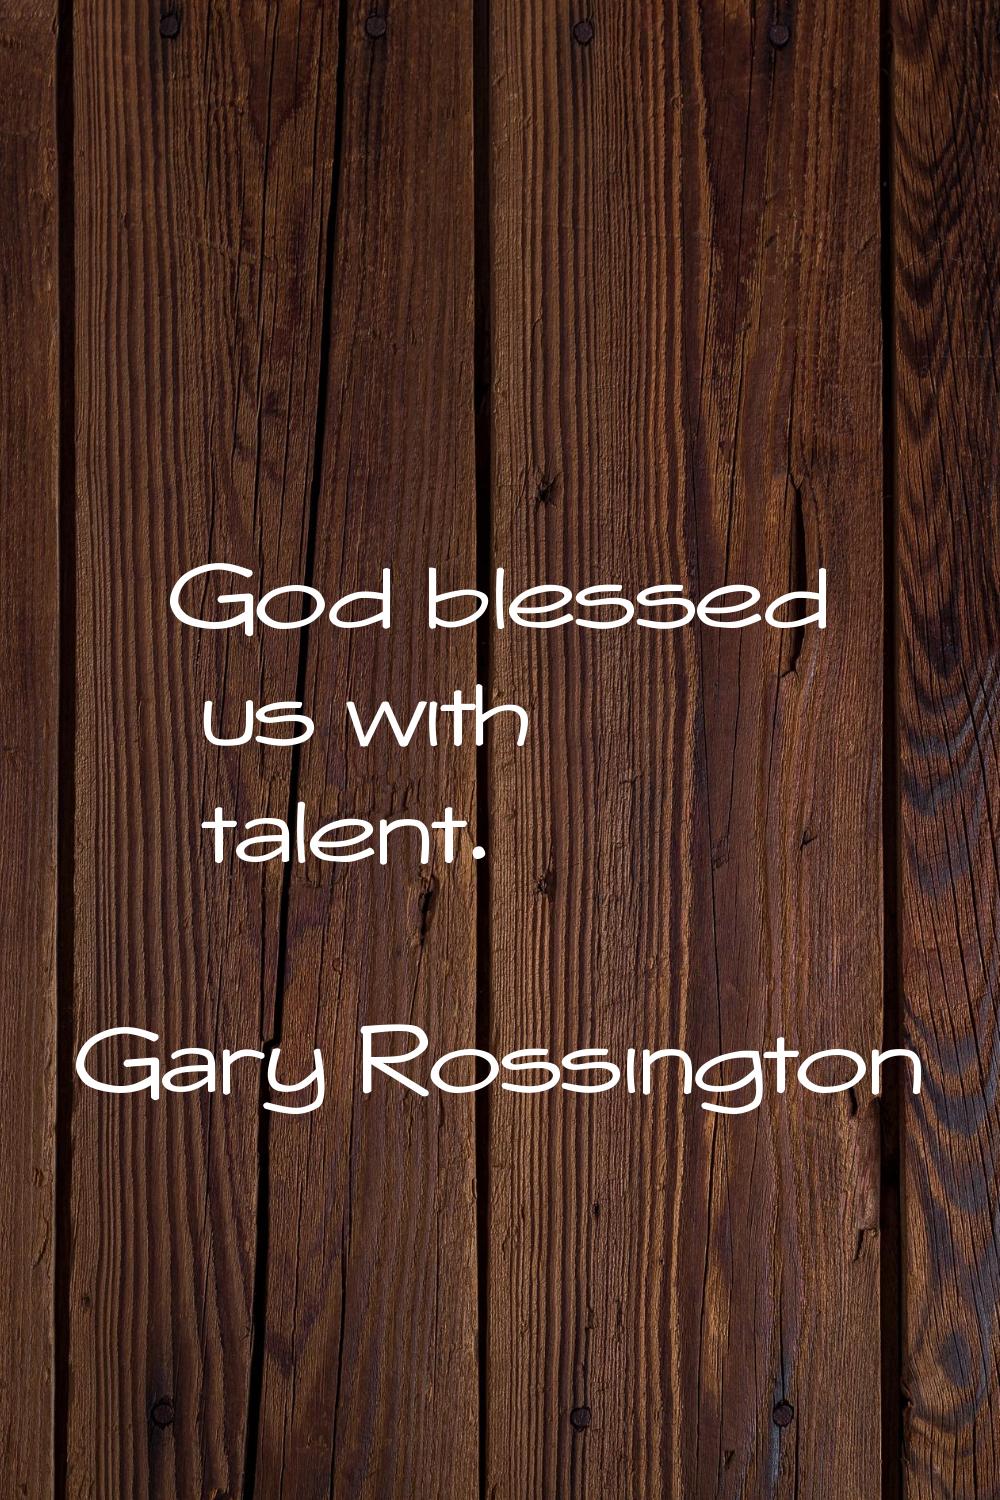 God blessed us with talent.